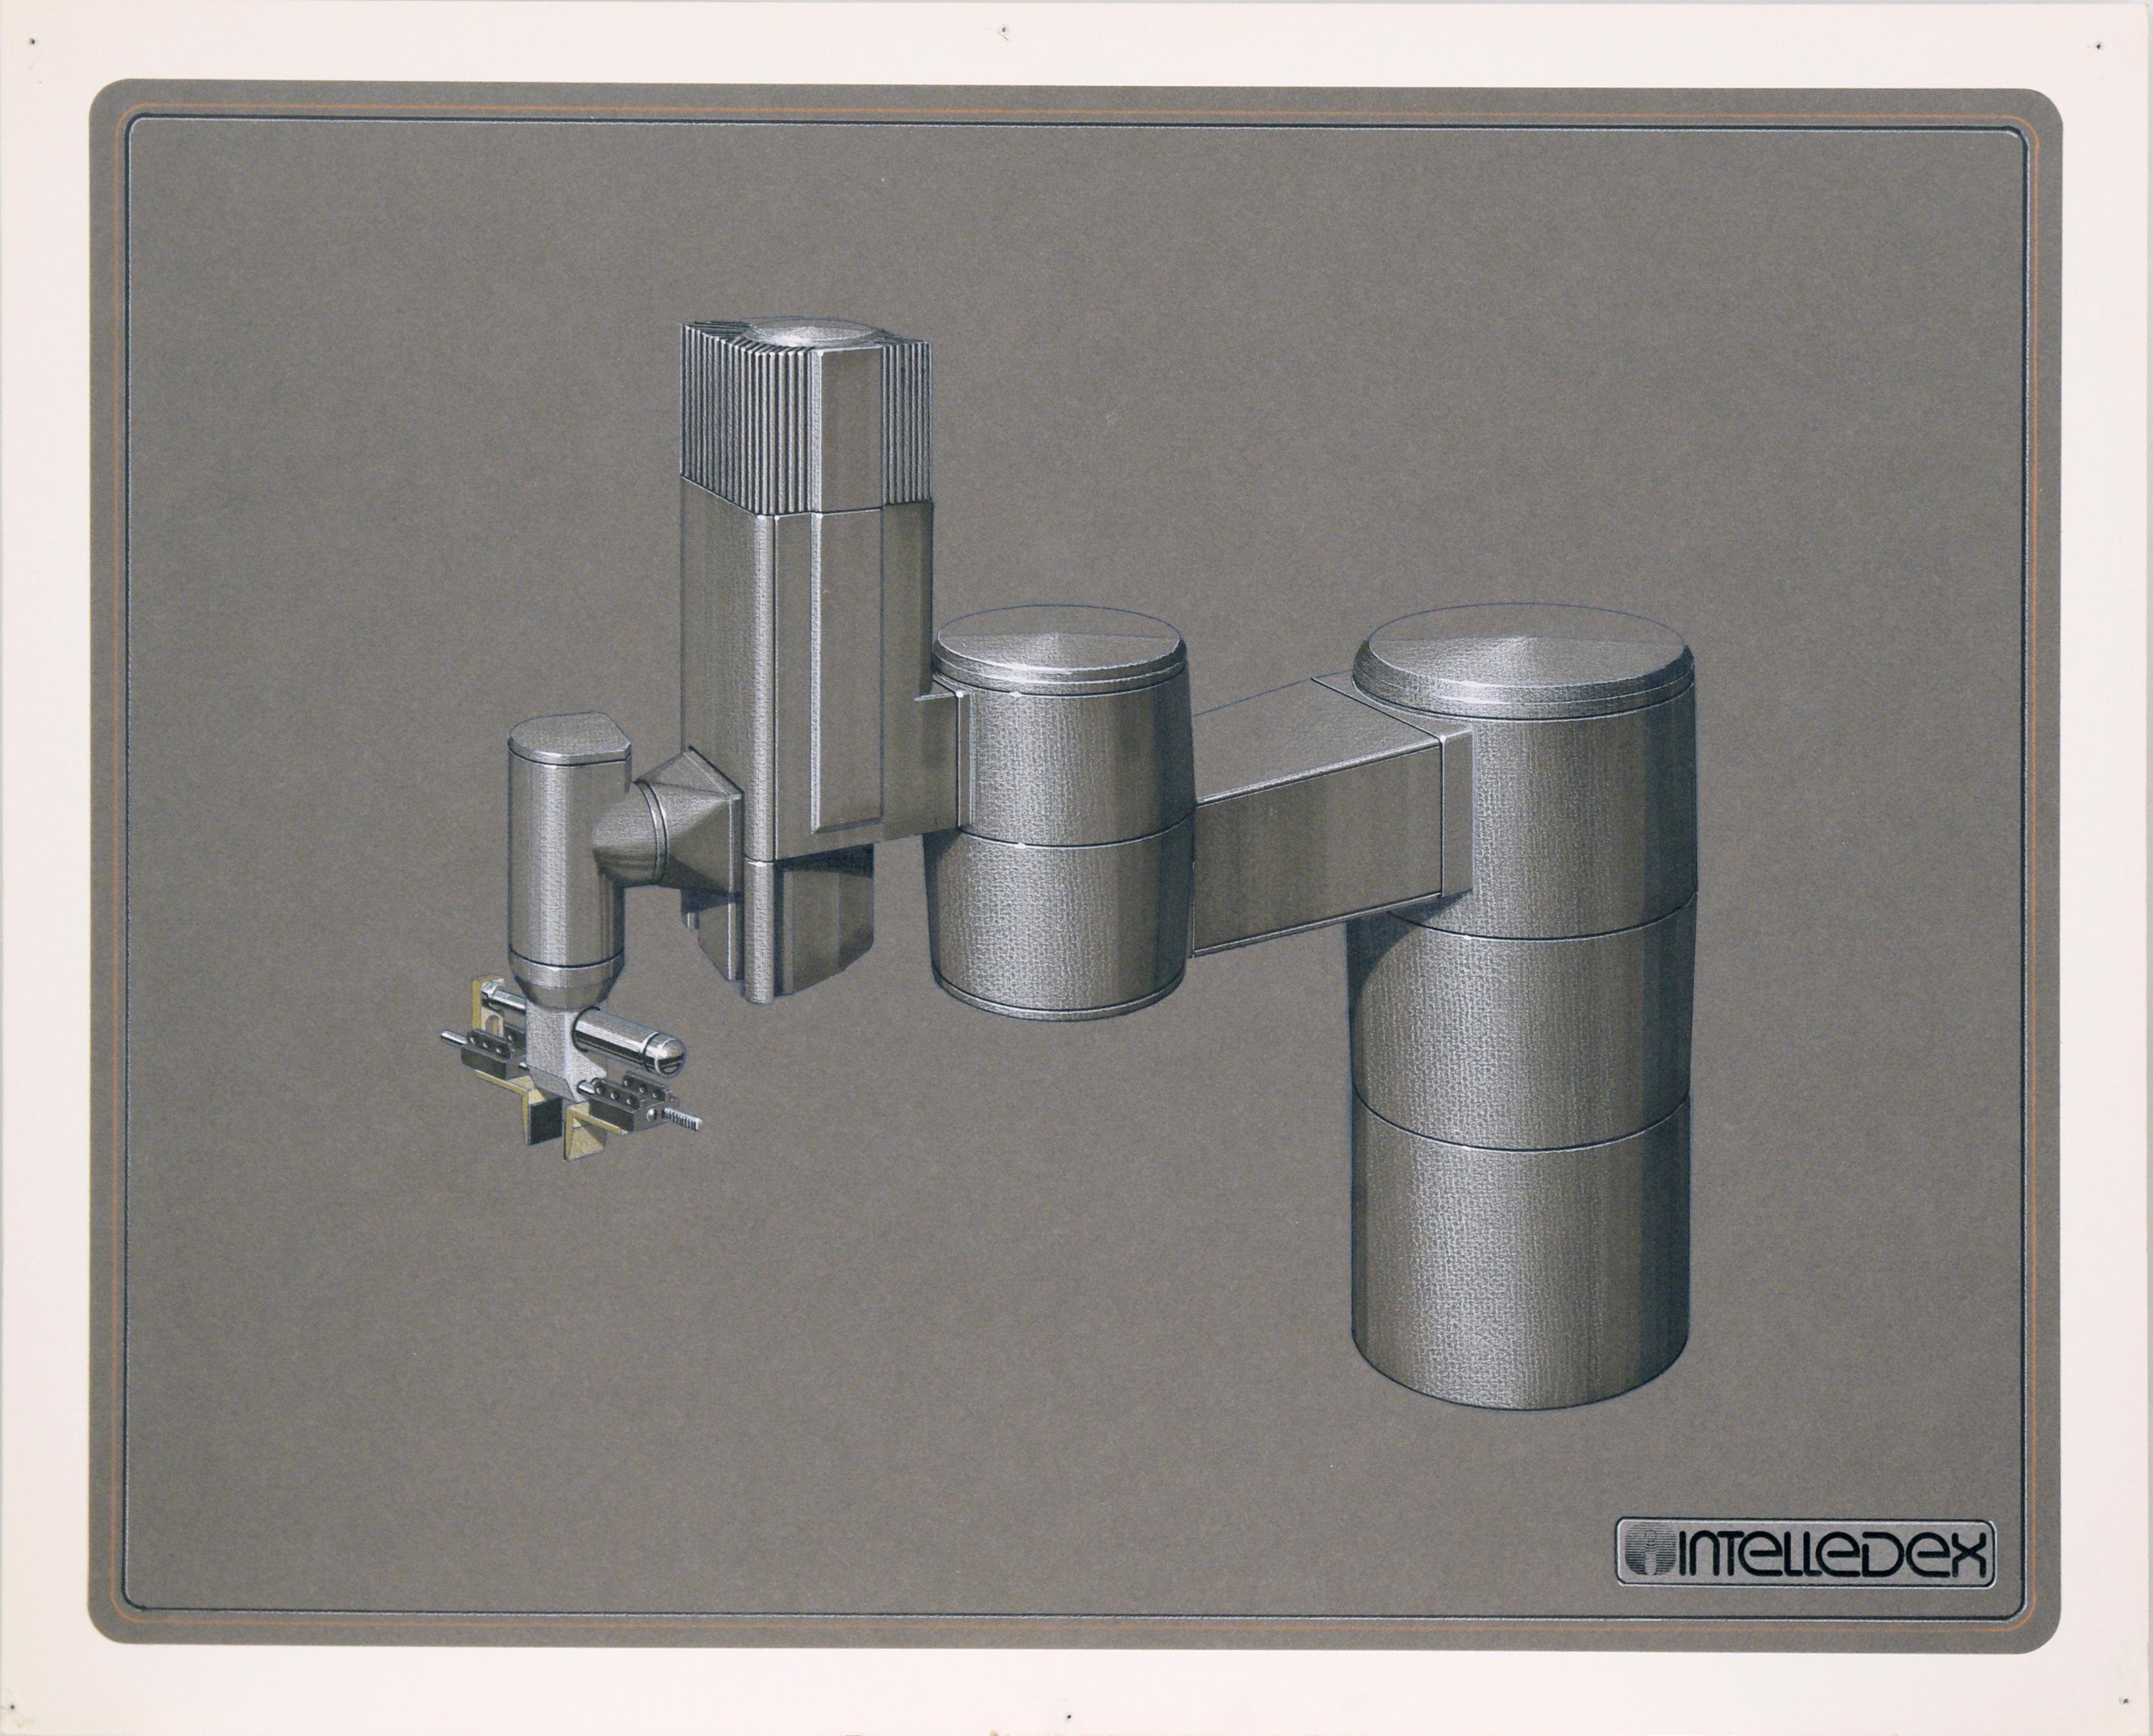 Edward T. Liljenwall Still-Life - Intelledex Industrial Machinery Design Drawing in Pencil and Ink on Paper